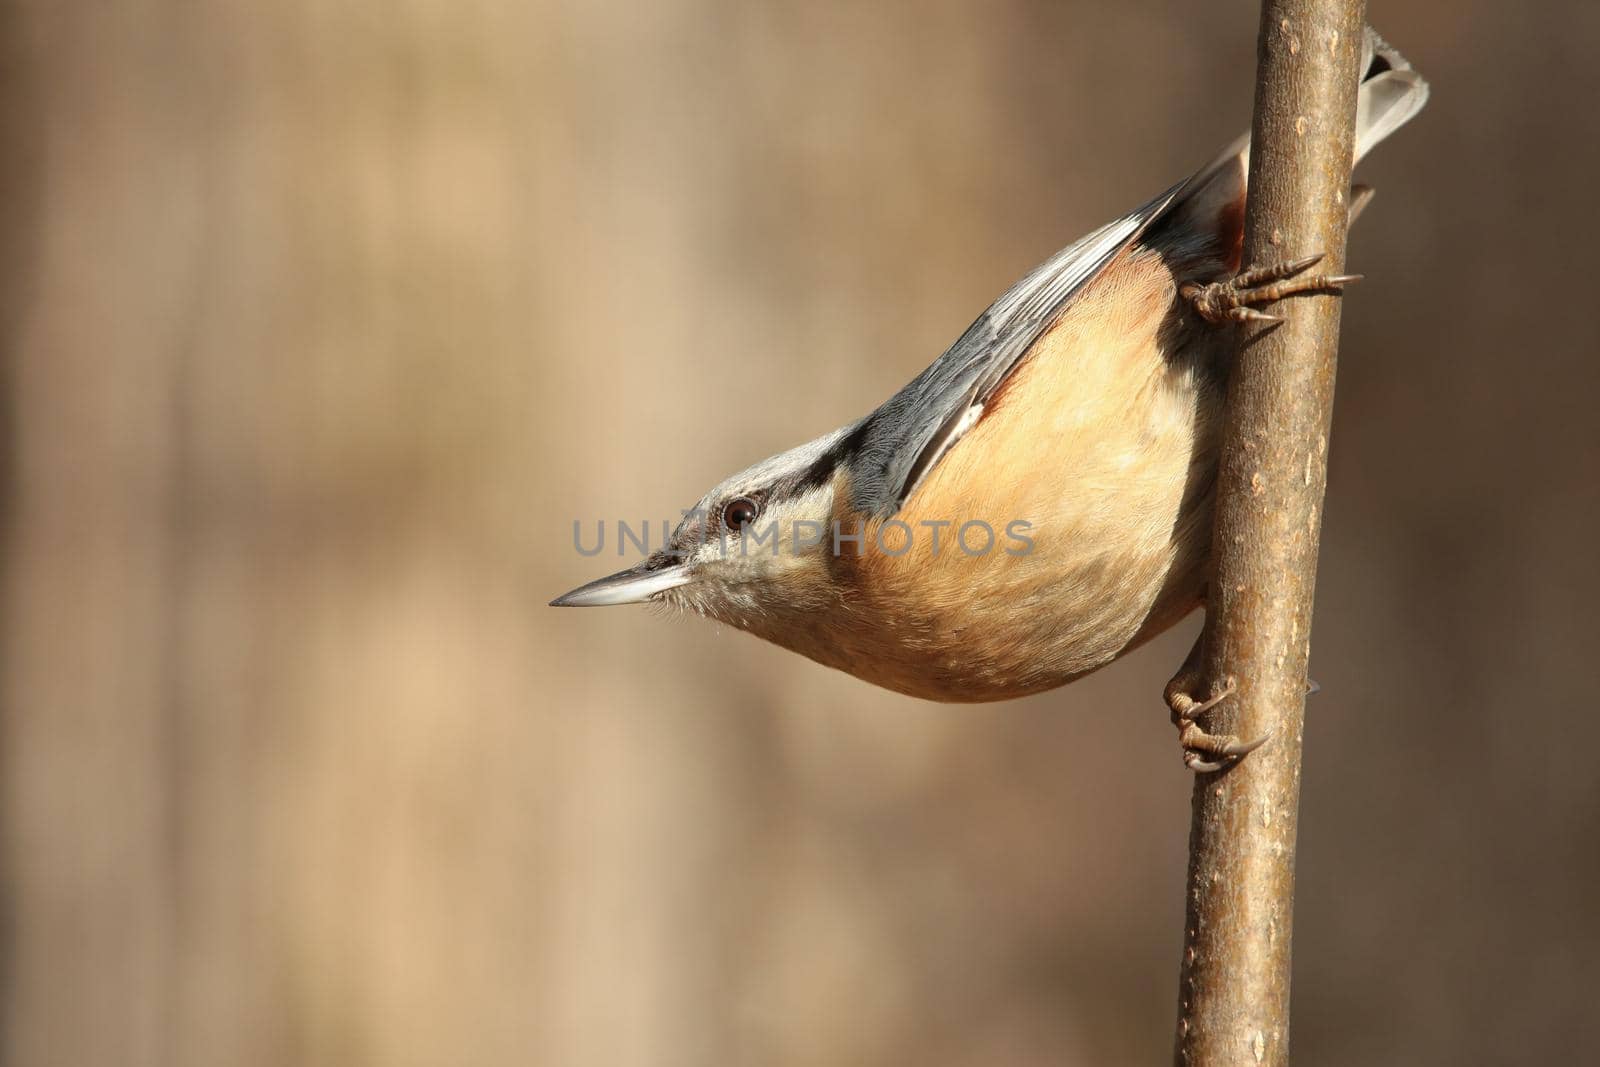 Nuthatch (Sitta europaea) on the branch.